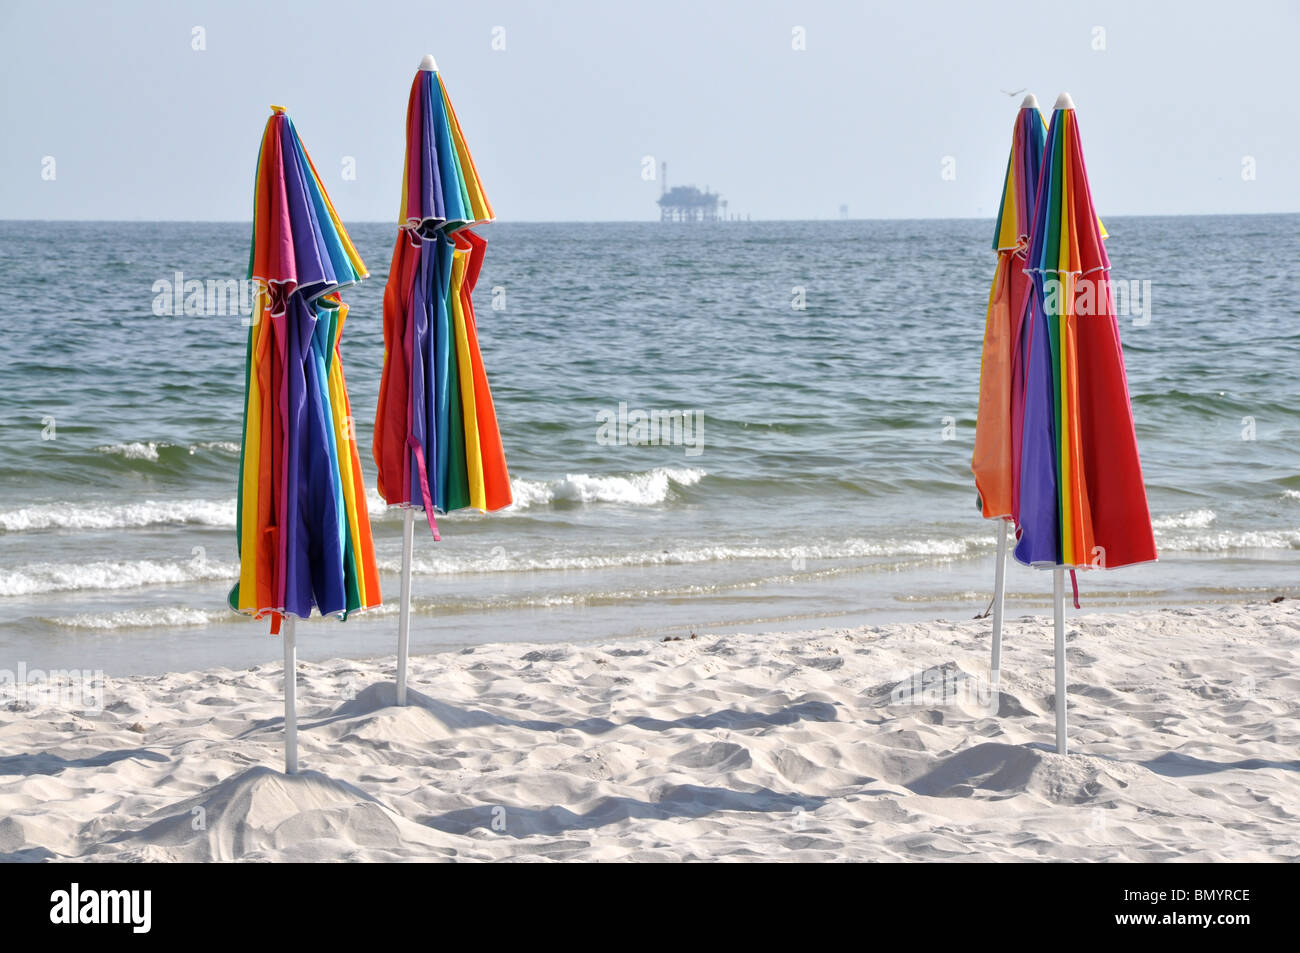 Abandoned beach with closed umbrellas. Off shore oil rig in background. Stock Photo